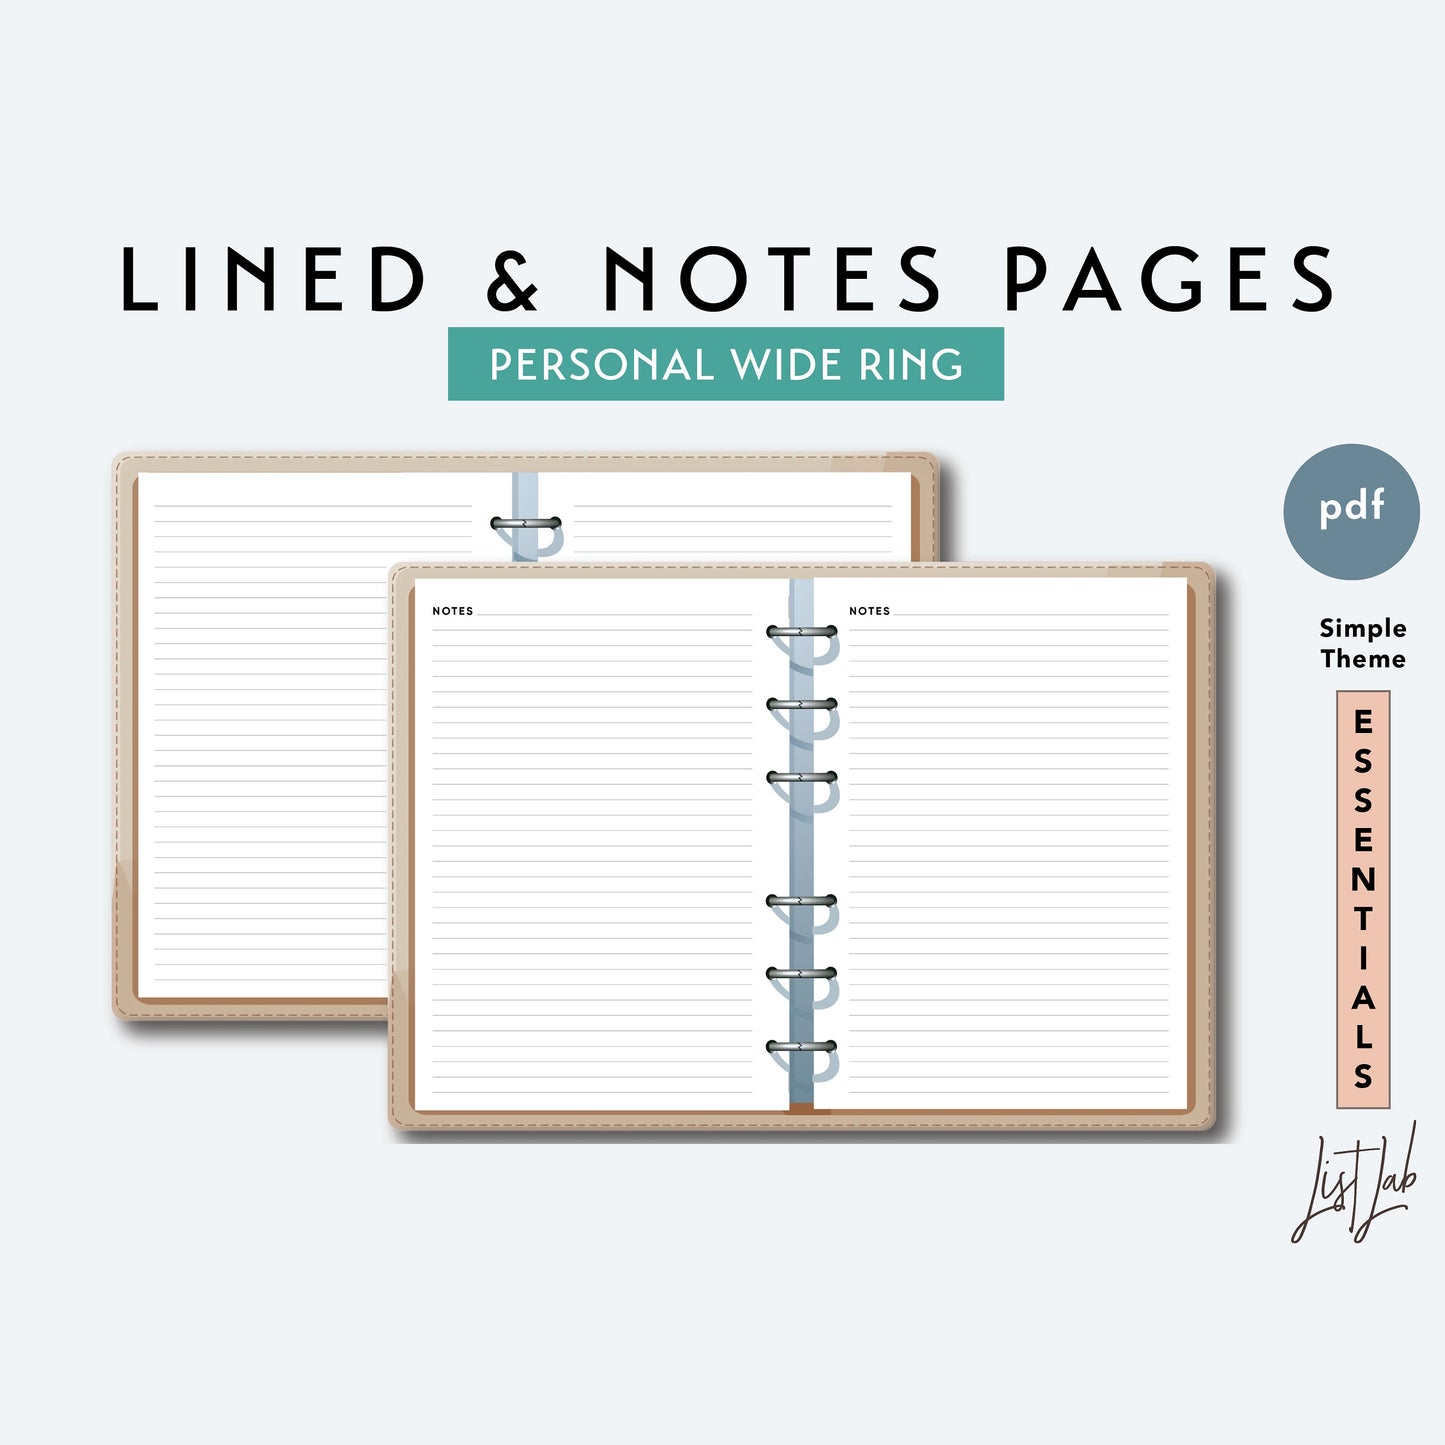 Personal Wide Ring NOTES and LINED Pages Printable Insert Set